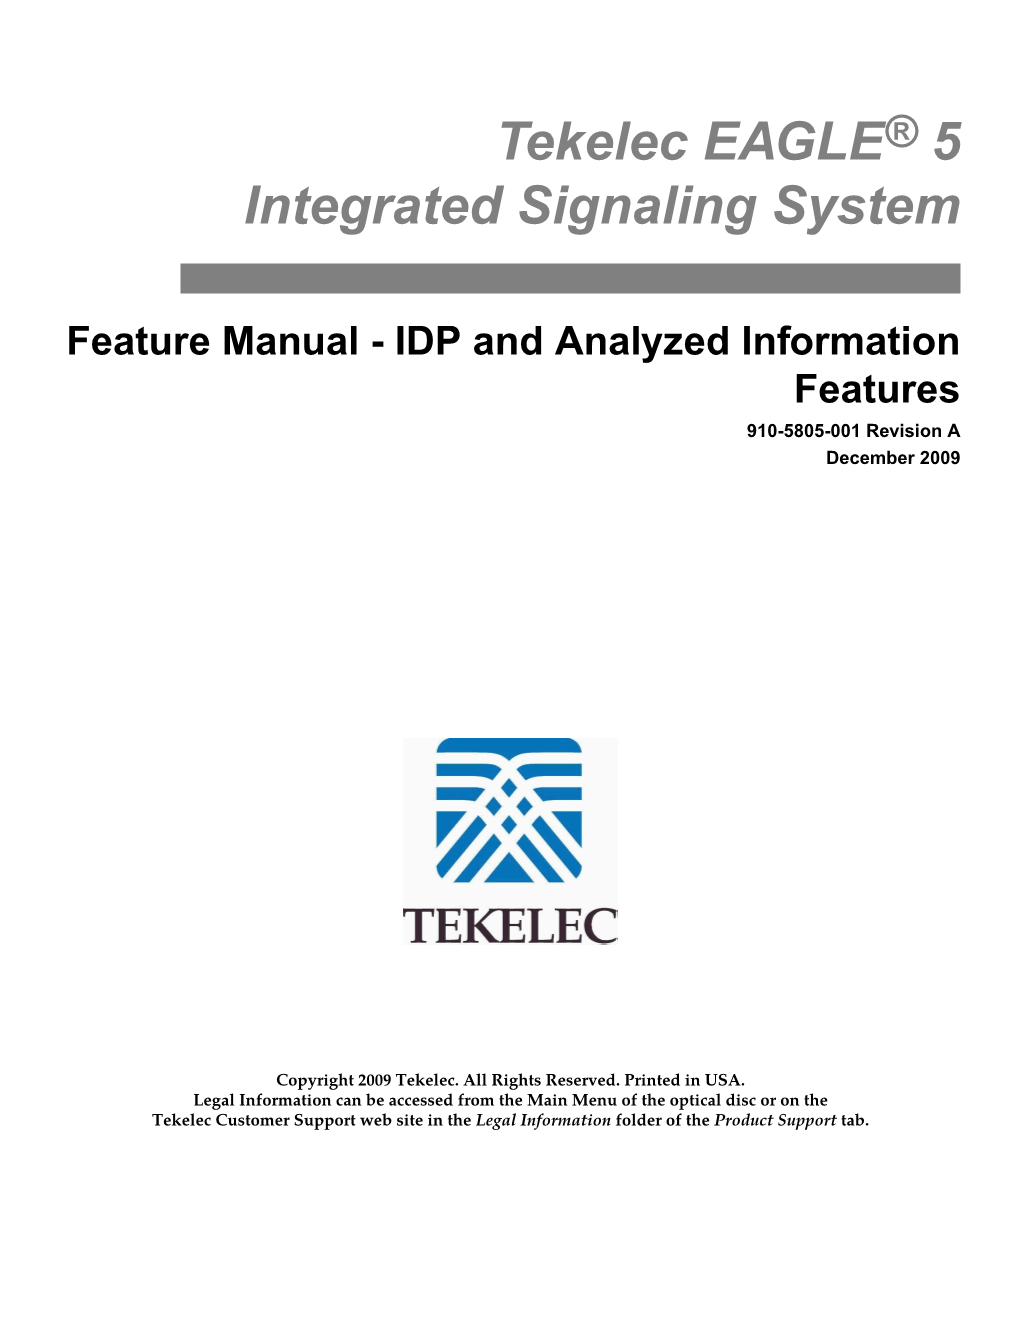 IDP and Analyzed Information Features 910-5805-001 Revision a December 2009